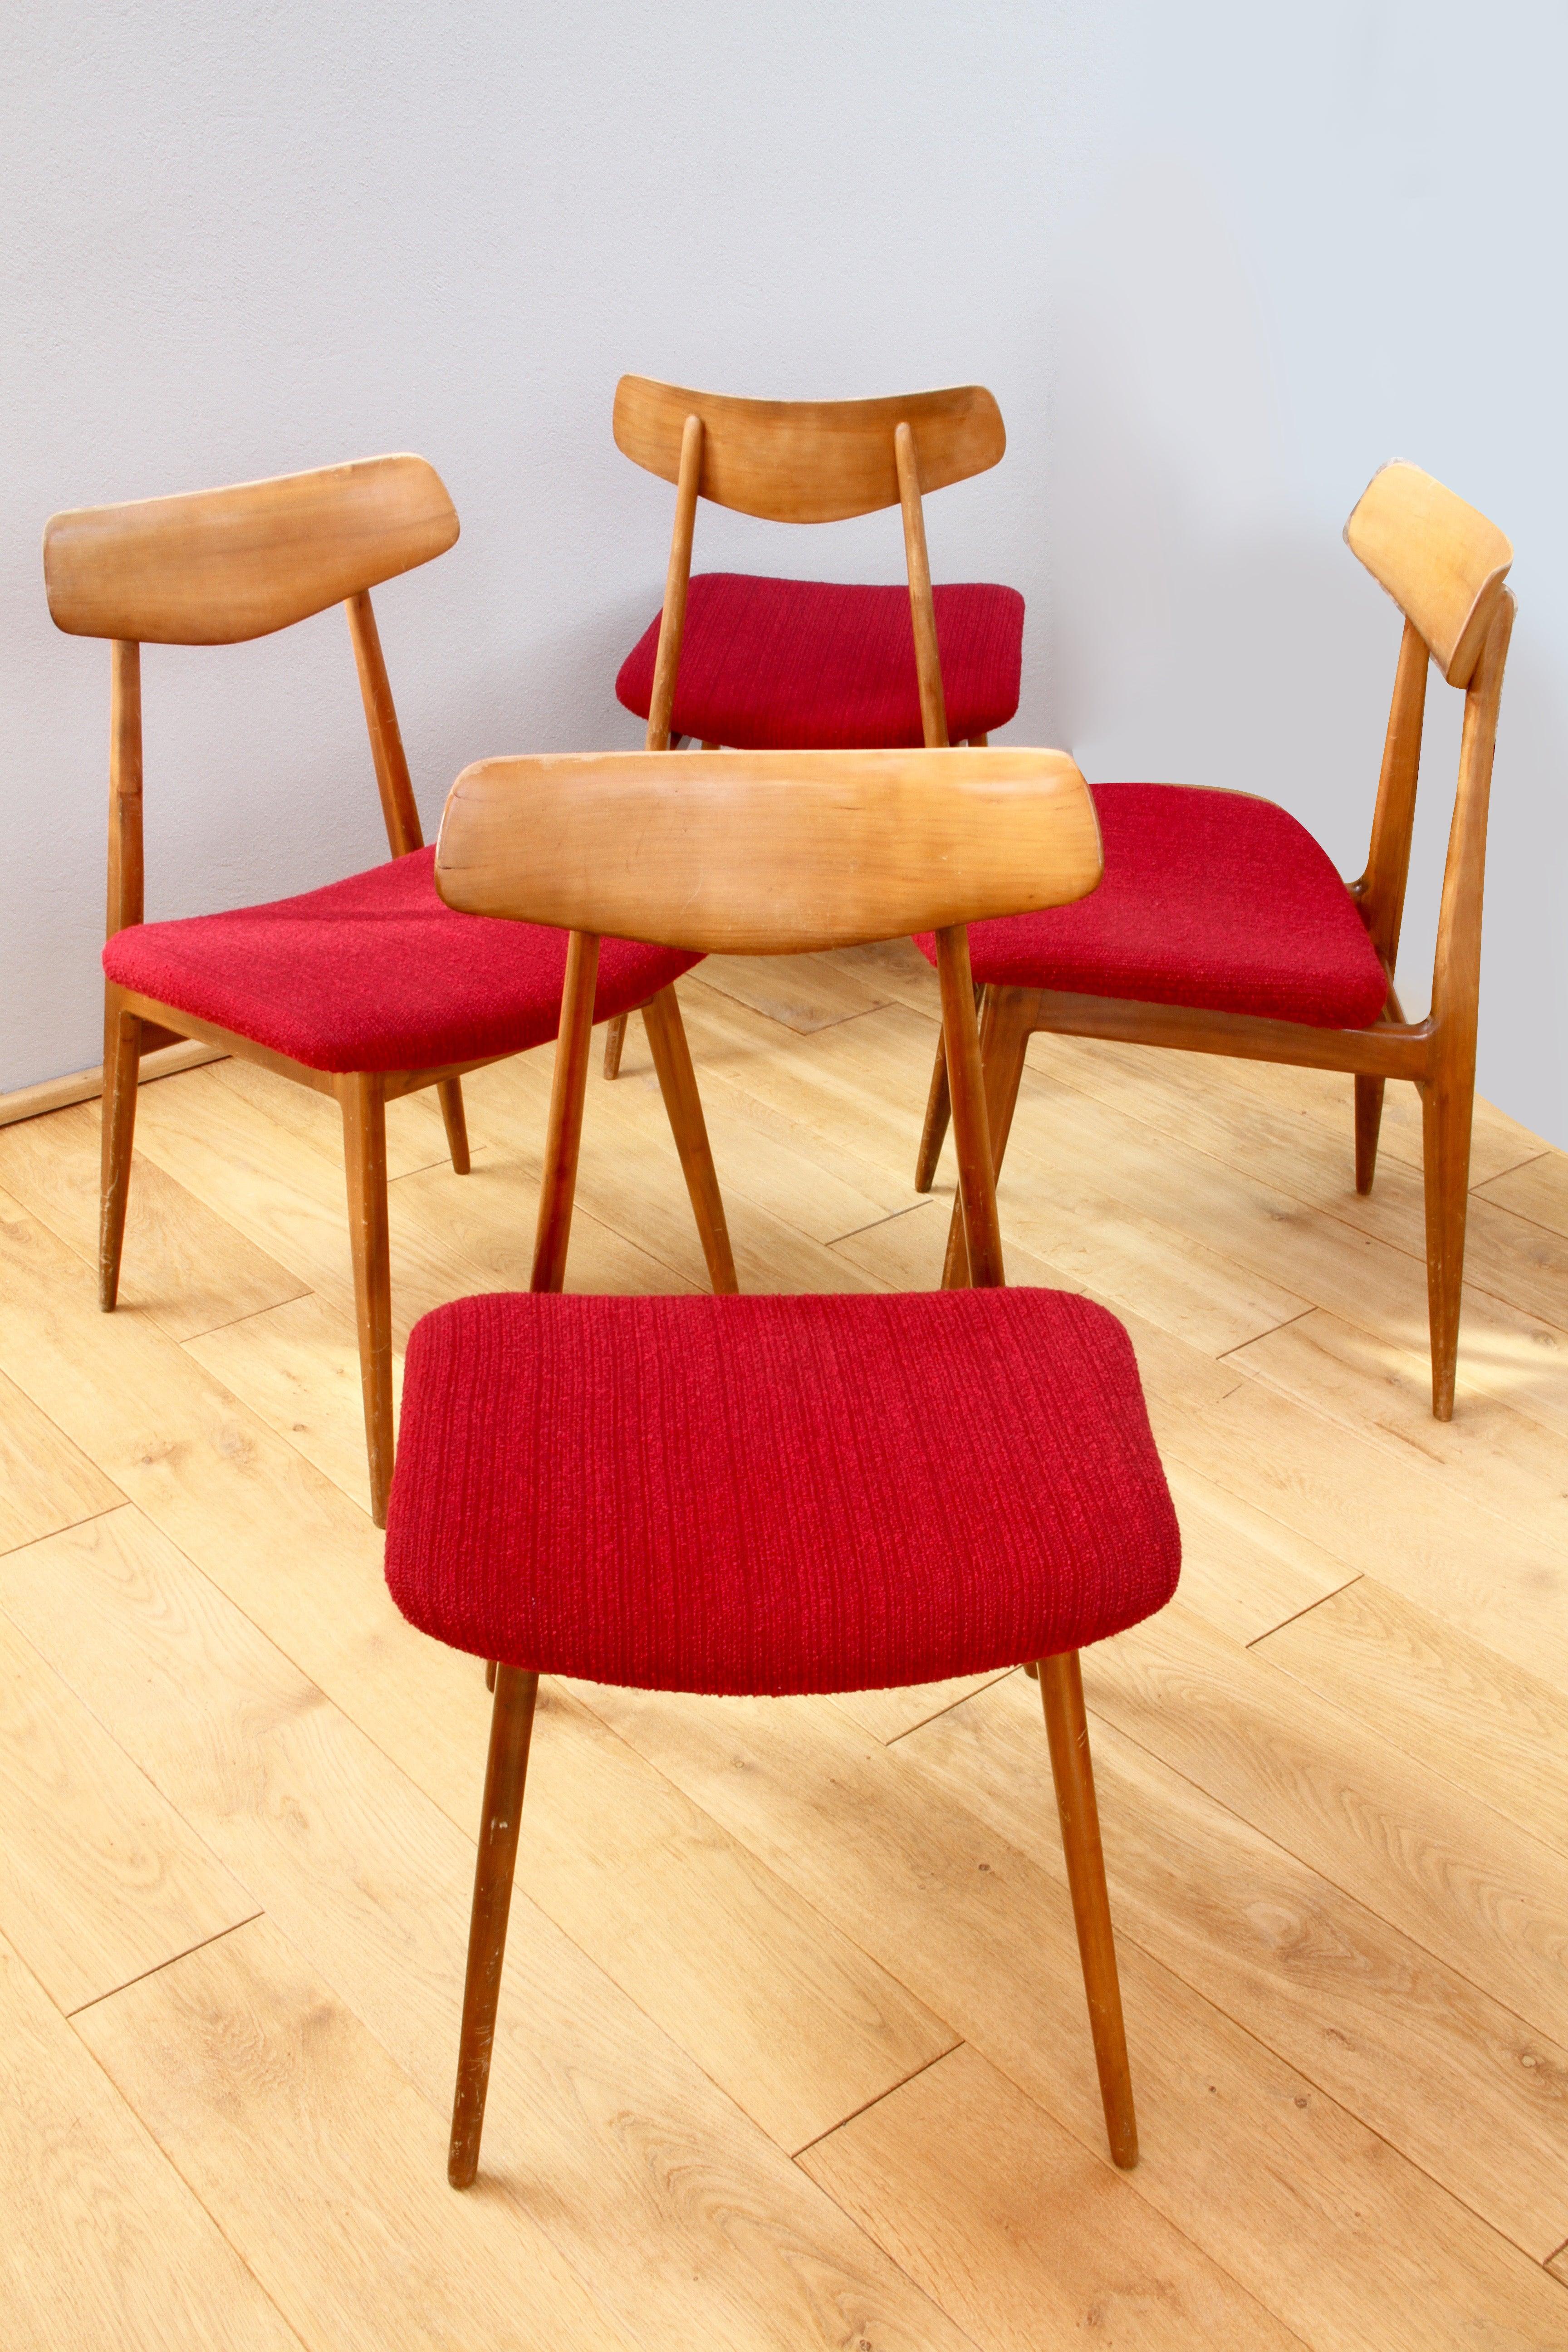 German Set of Four Vintage Midcentury Dining Chairs or Stools by Habeo, circa 1950s